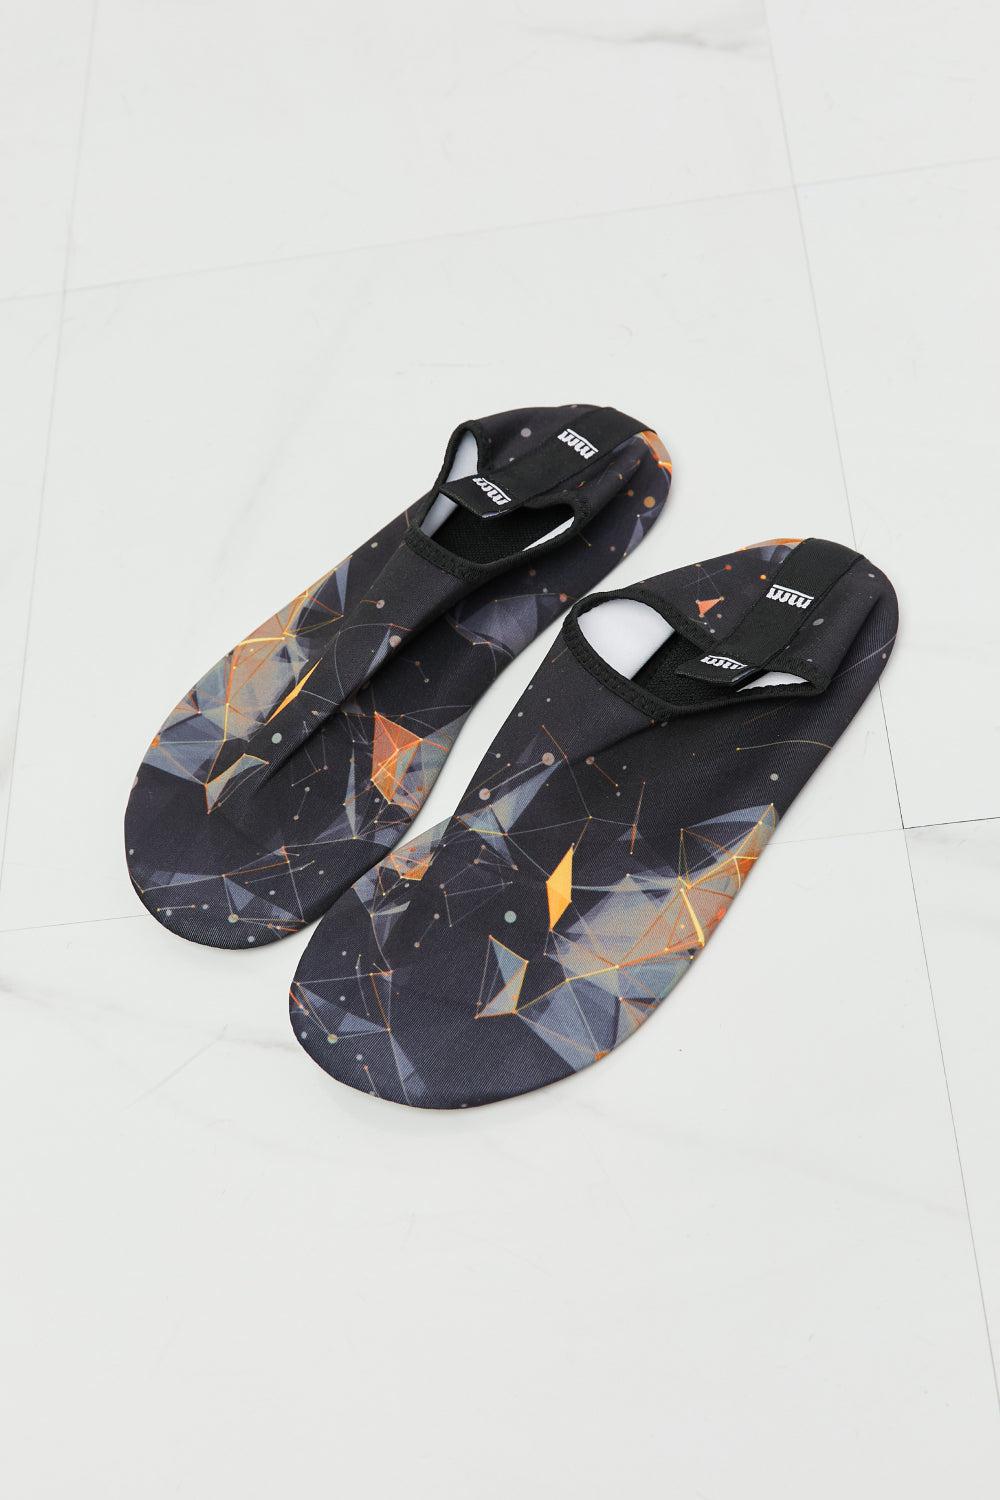 MMshoes On The Shore Water Shoes in Black/Orange BLUE ZONE PLANET